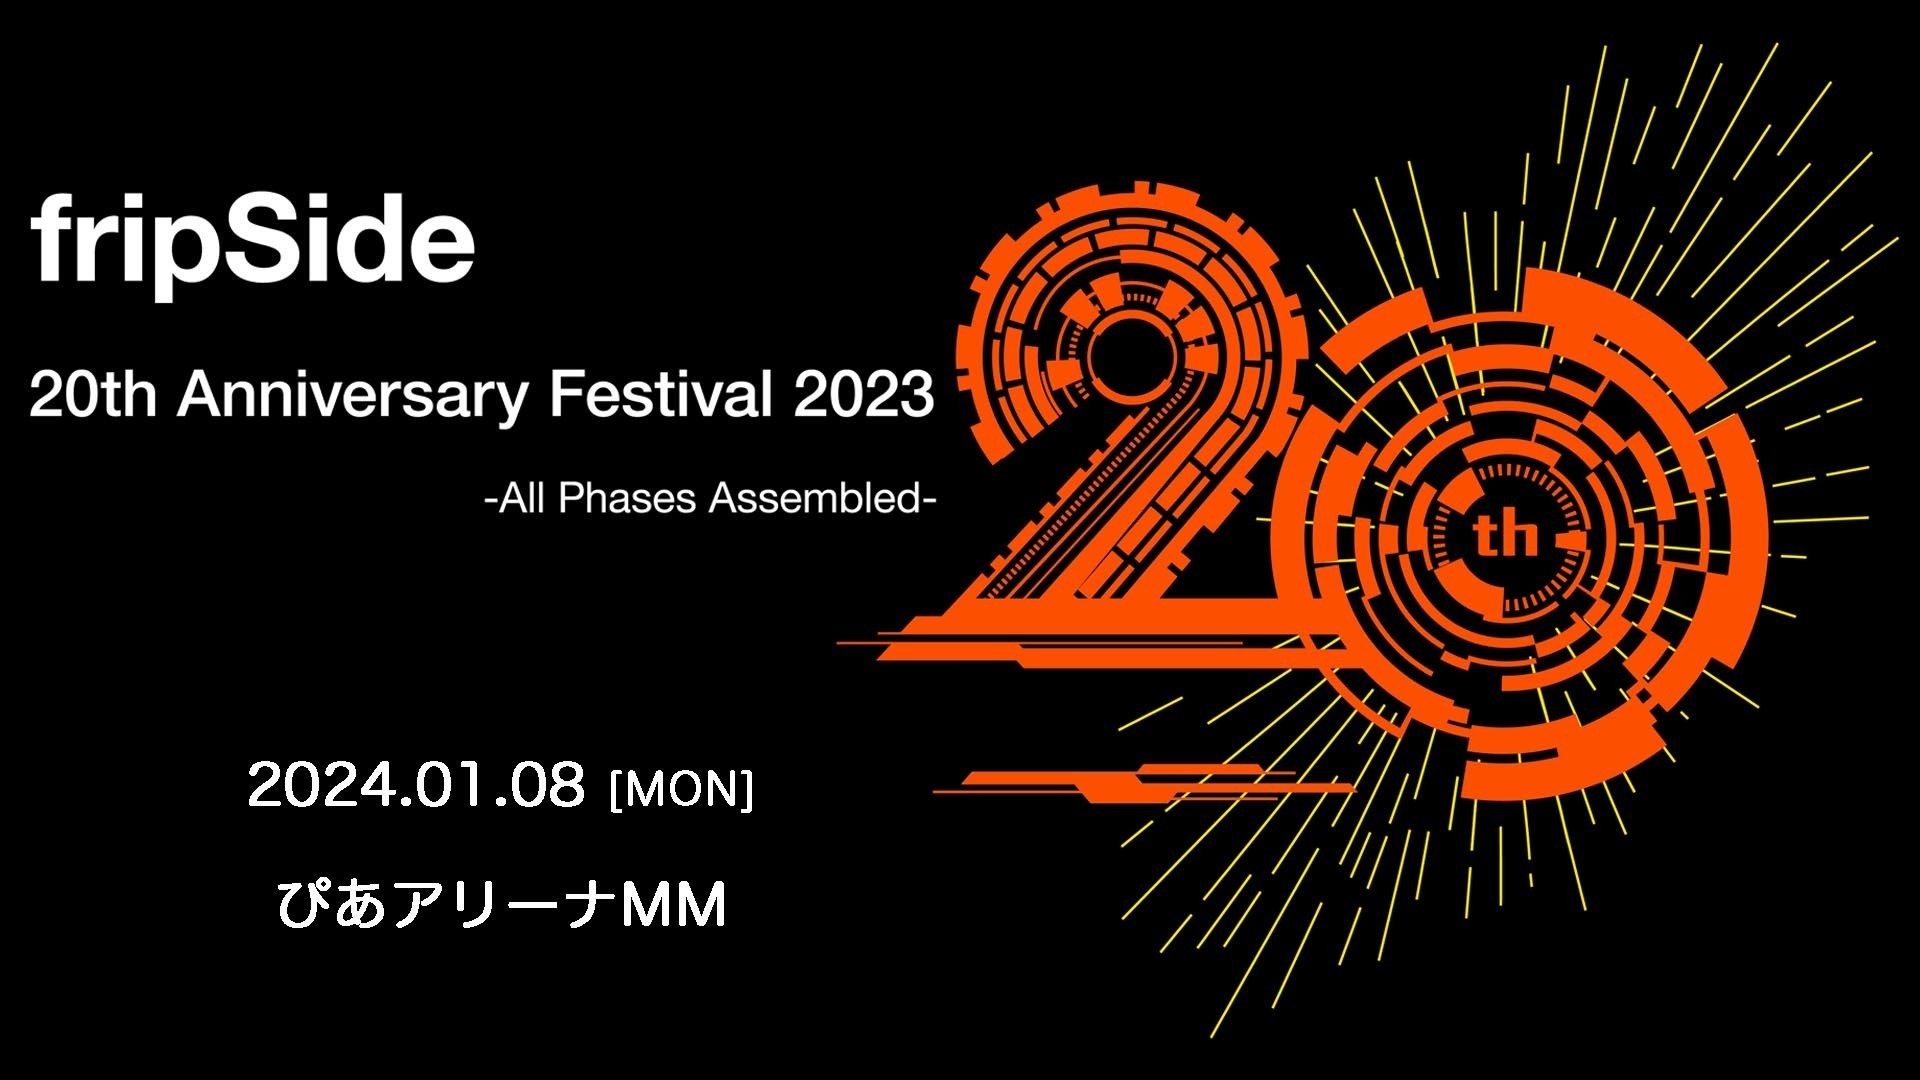 fripSide 20th Anniversary Festival 2023 -All Phases Assembled ...